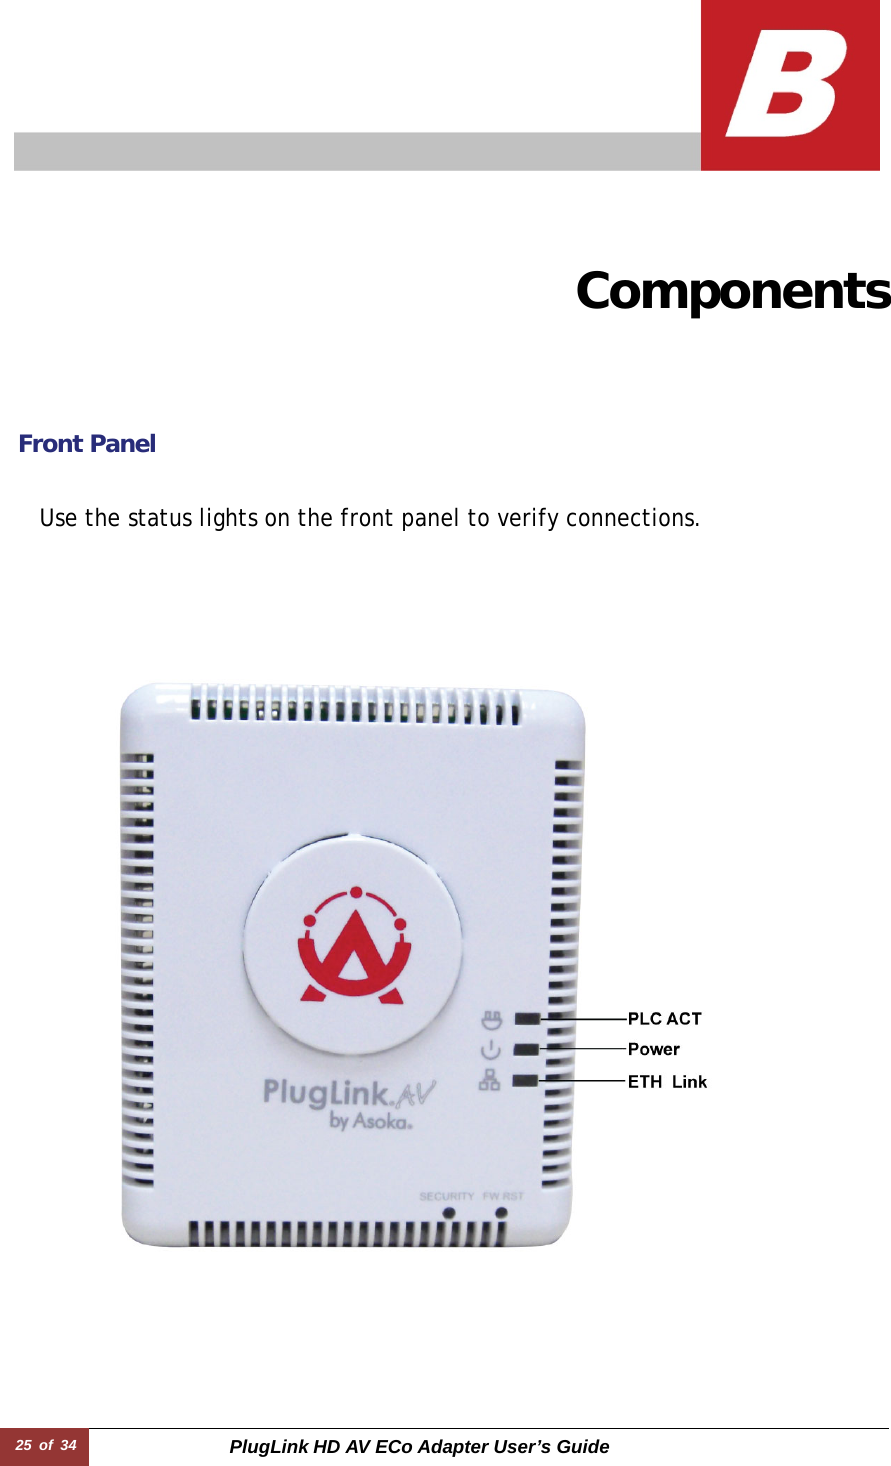 25 of 34  PlugLink HD AV ECo Adapter User’s Guide                     Components   Front Panel   Use the status lights on the front panel to verify connections.  